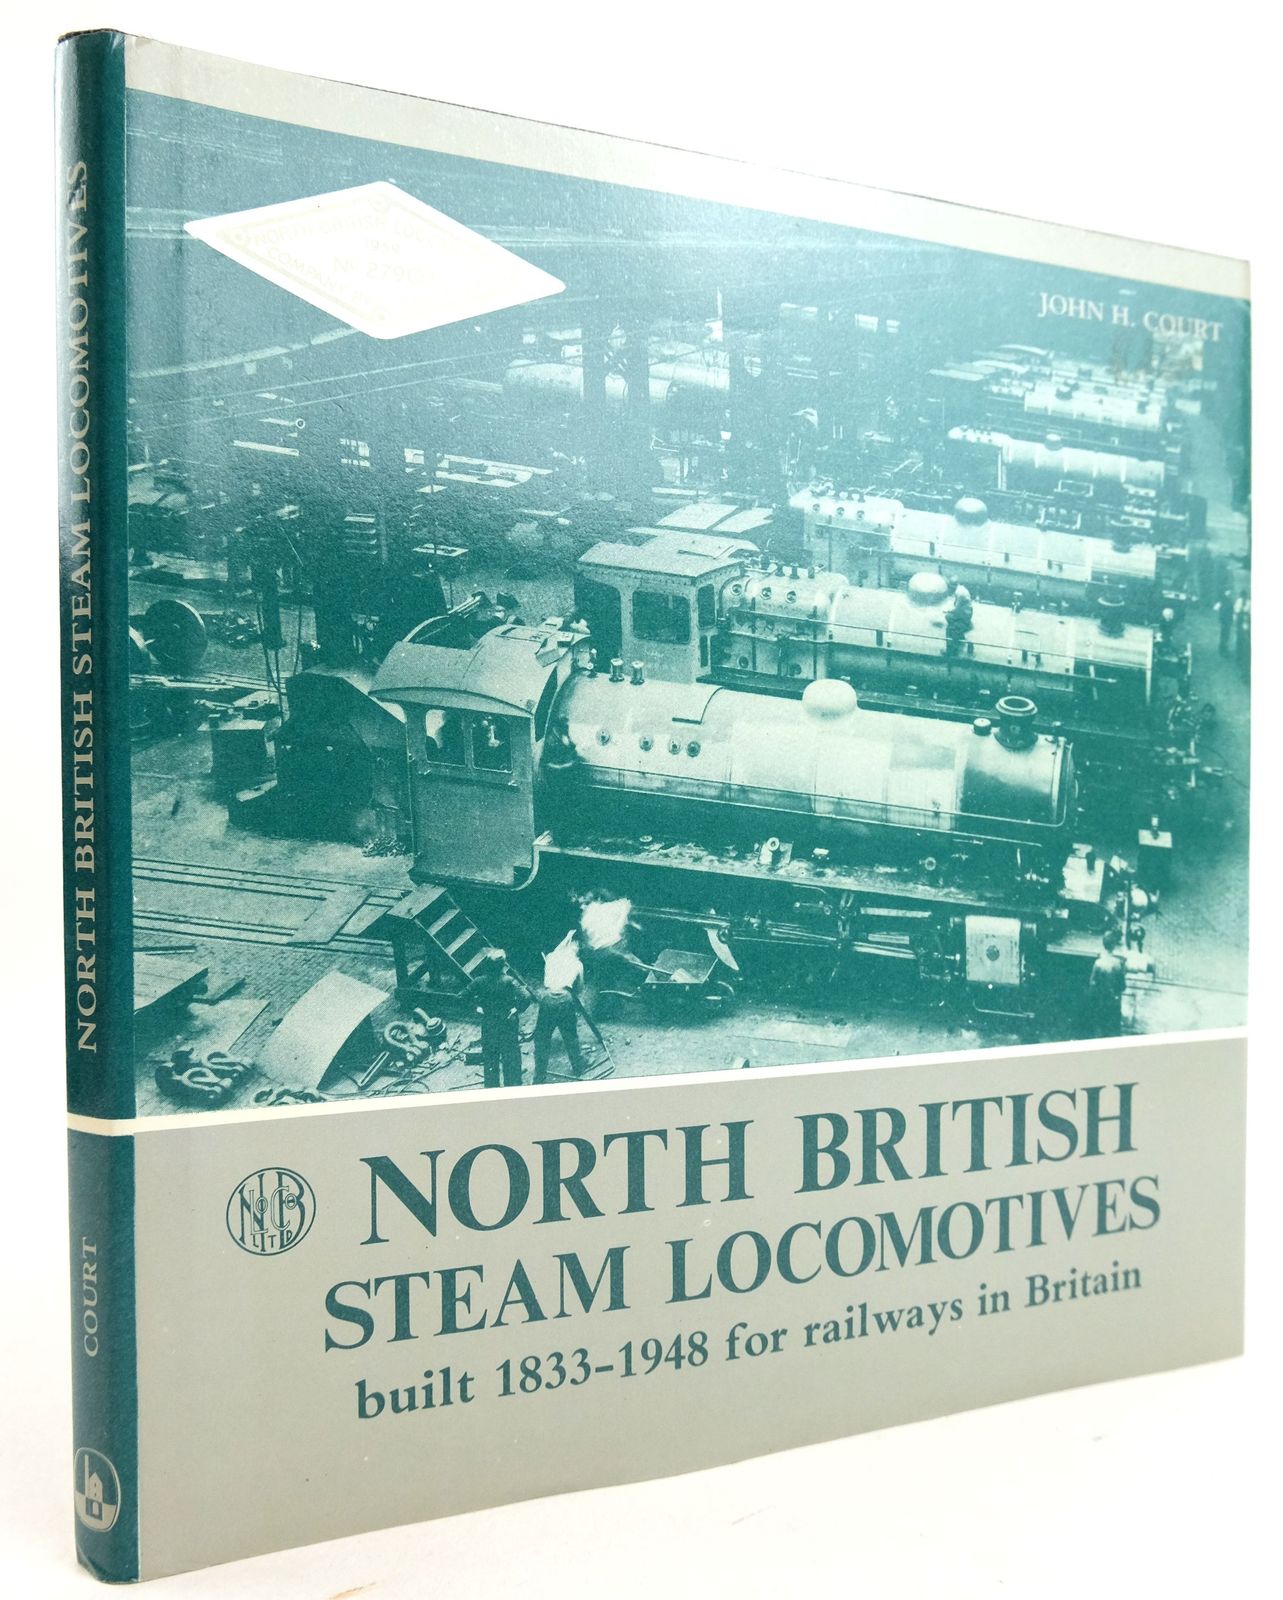 Photo of NORTH BRITISH STEAM LOCOMOTIVES BUILT 1833-1948 FOR RAILWAYS IN BRITAIN written by Court, John H. published by D. Bradford Barton (STOCK CODE: 1819874)  for sale by Stella & Rose's Books